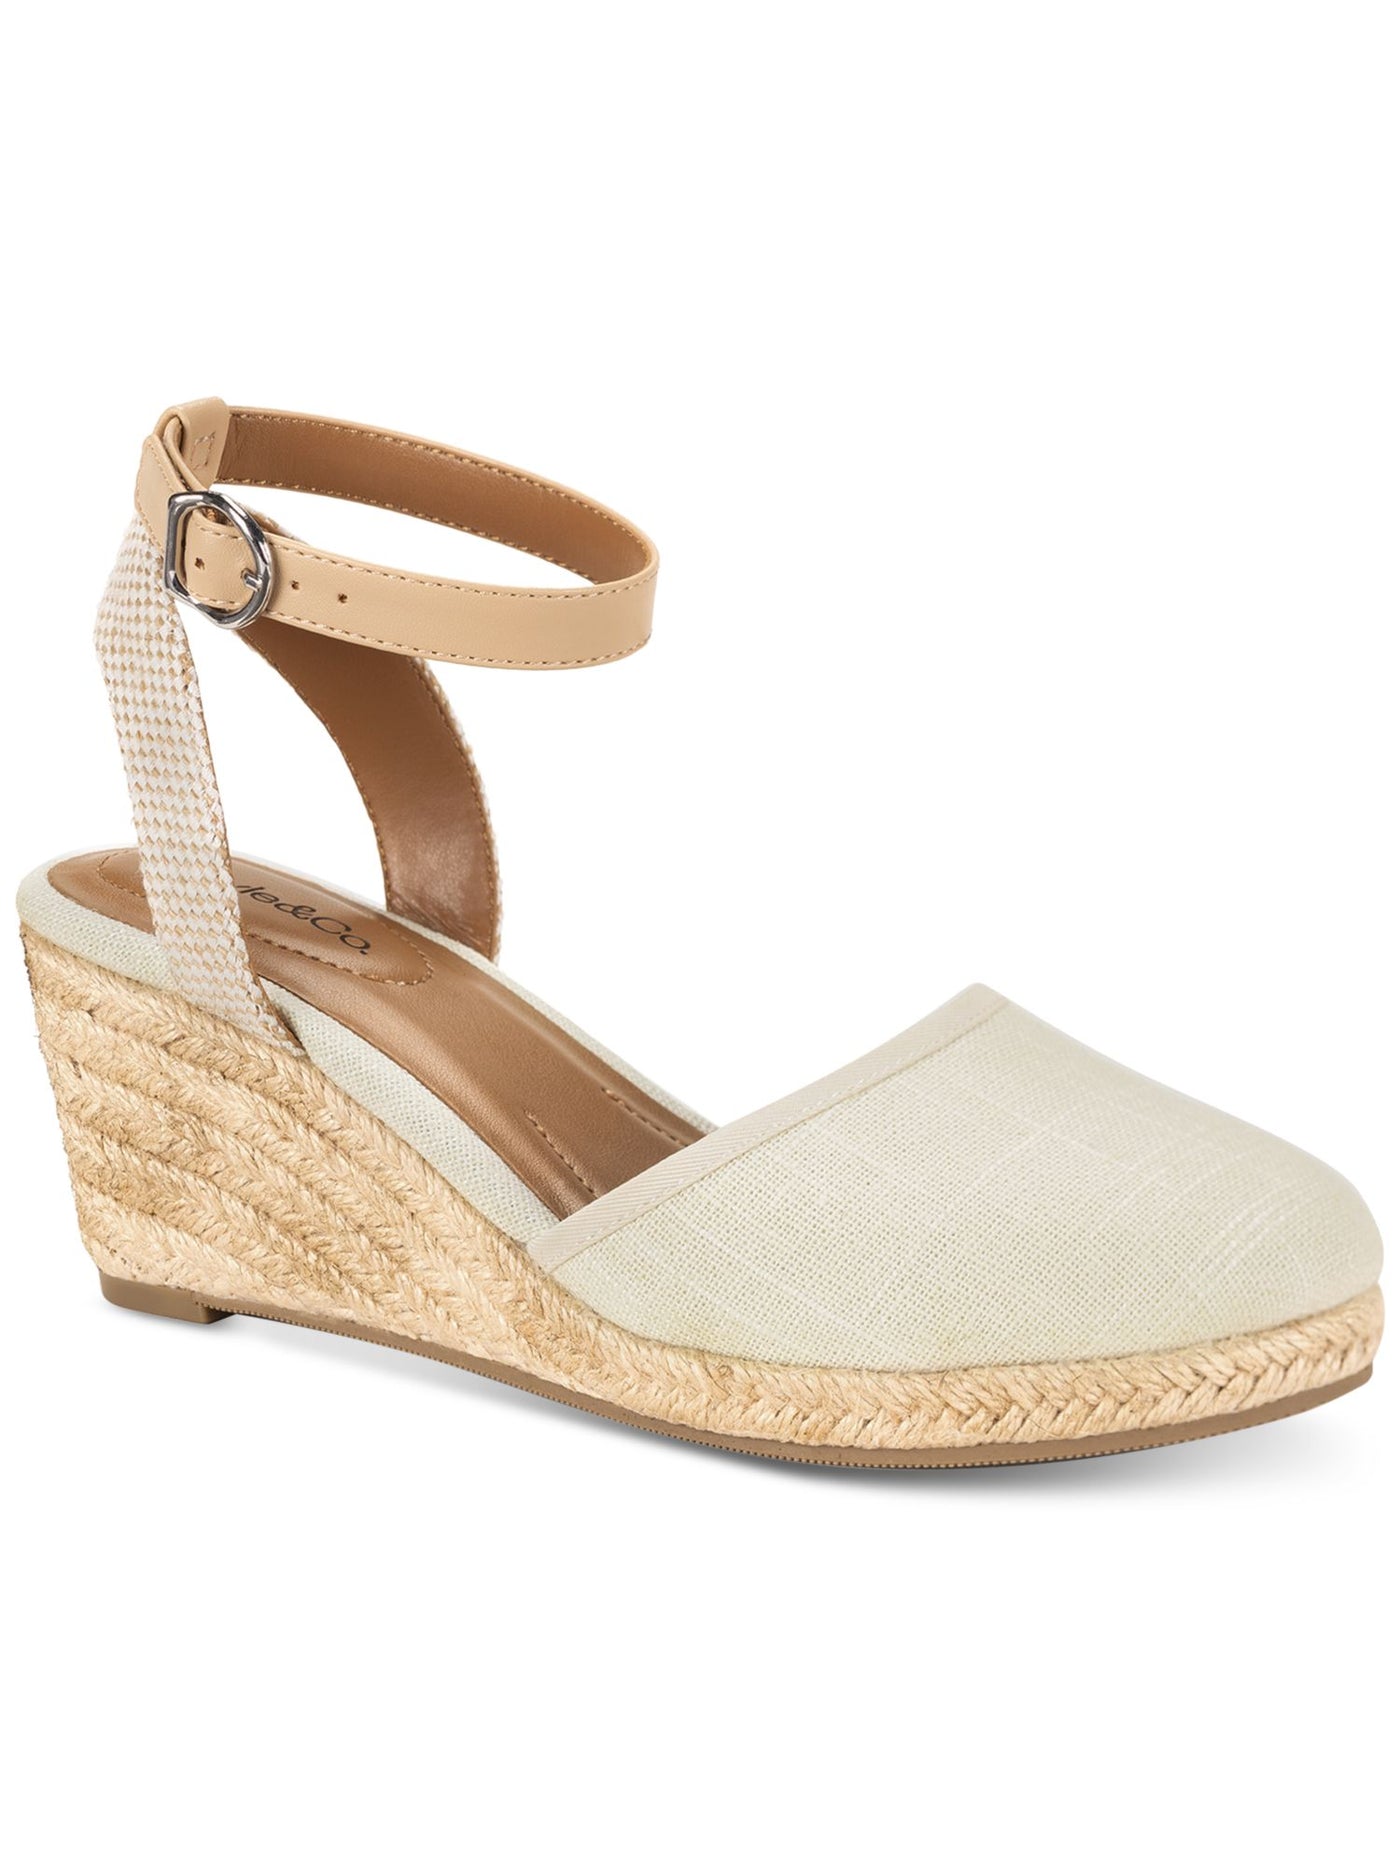 STYLE & COMPANY Womens Beige Mixed Media Ankle Strap Padded Mailena Round Toe Wedge Buckle Espadrille Shoes 6.5 M